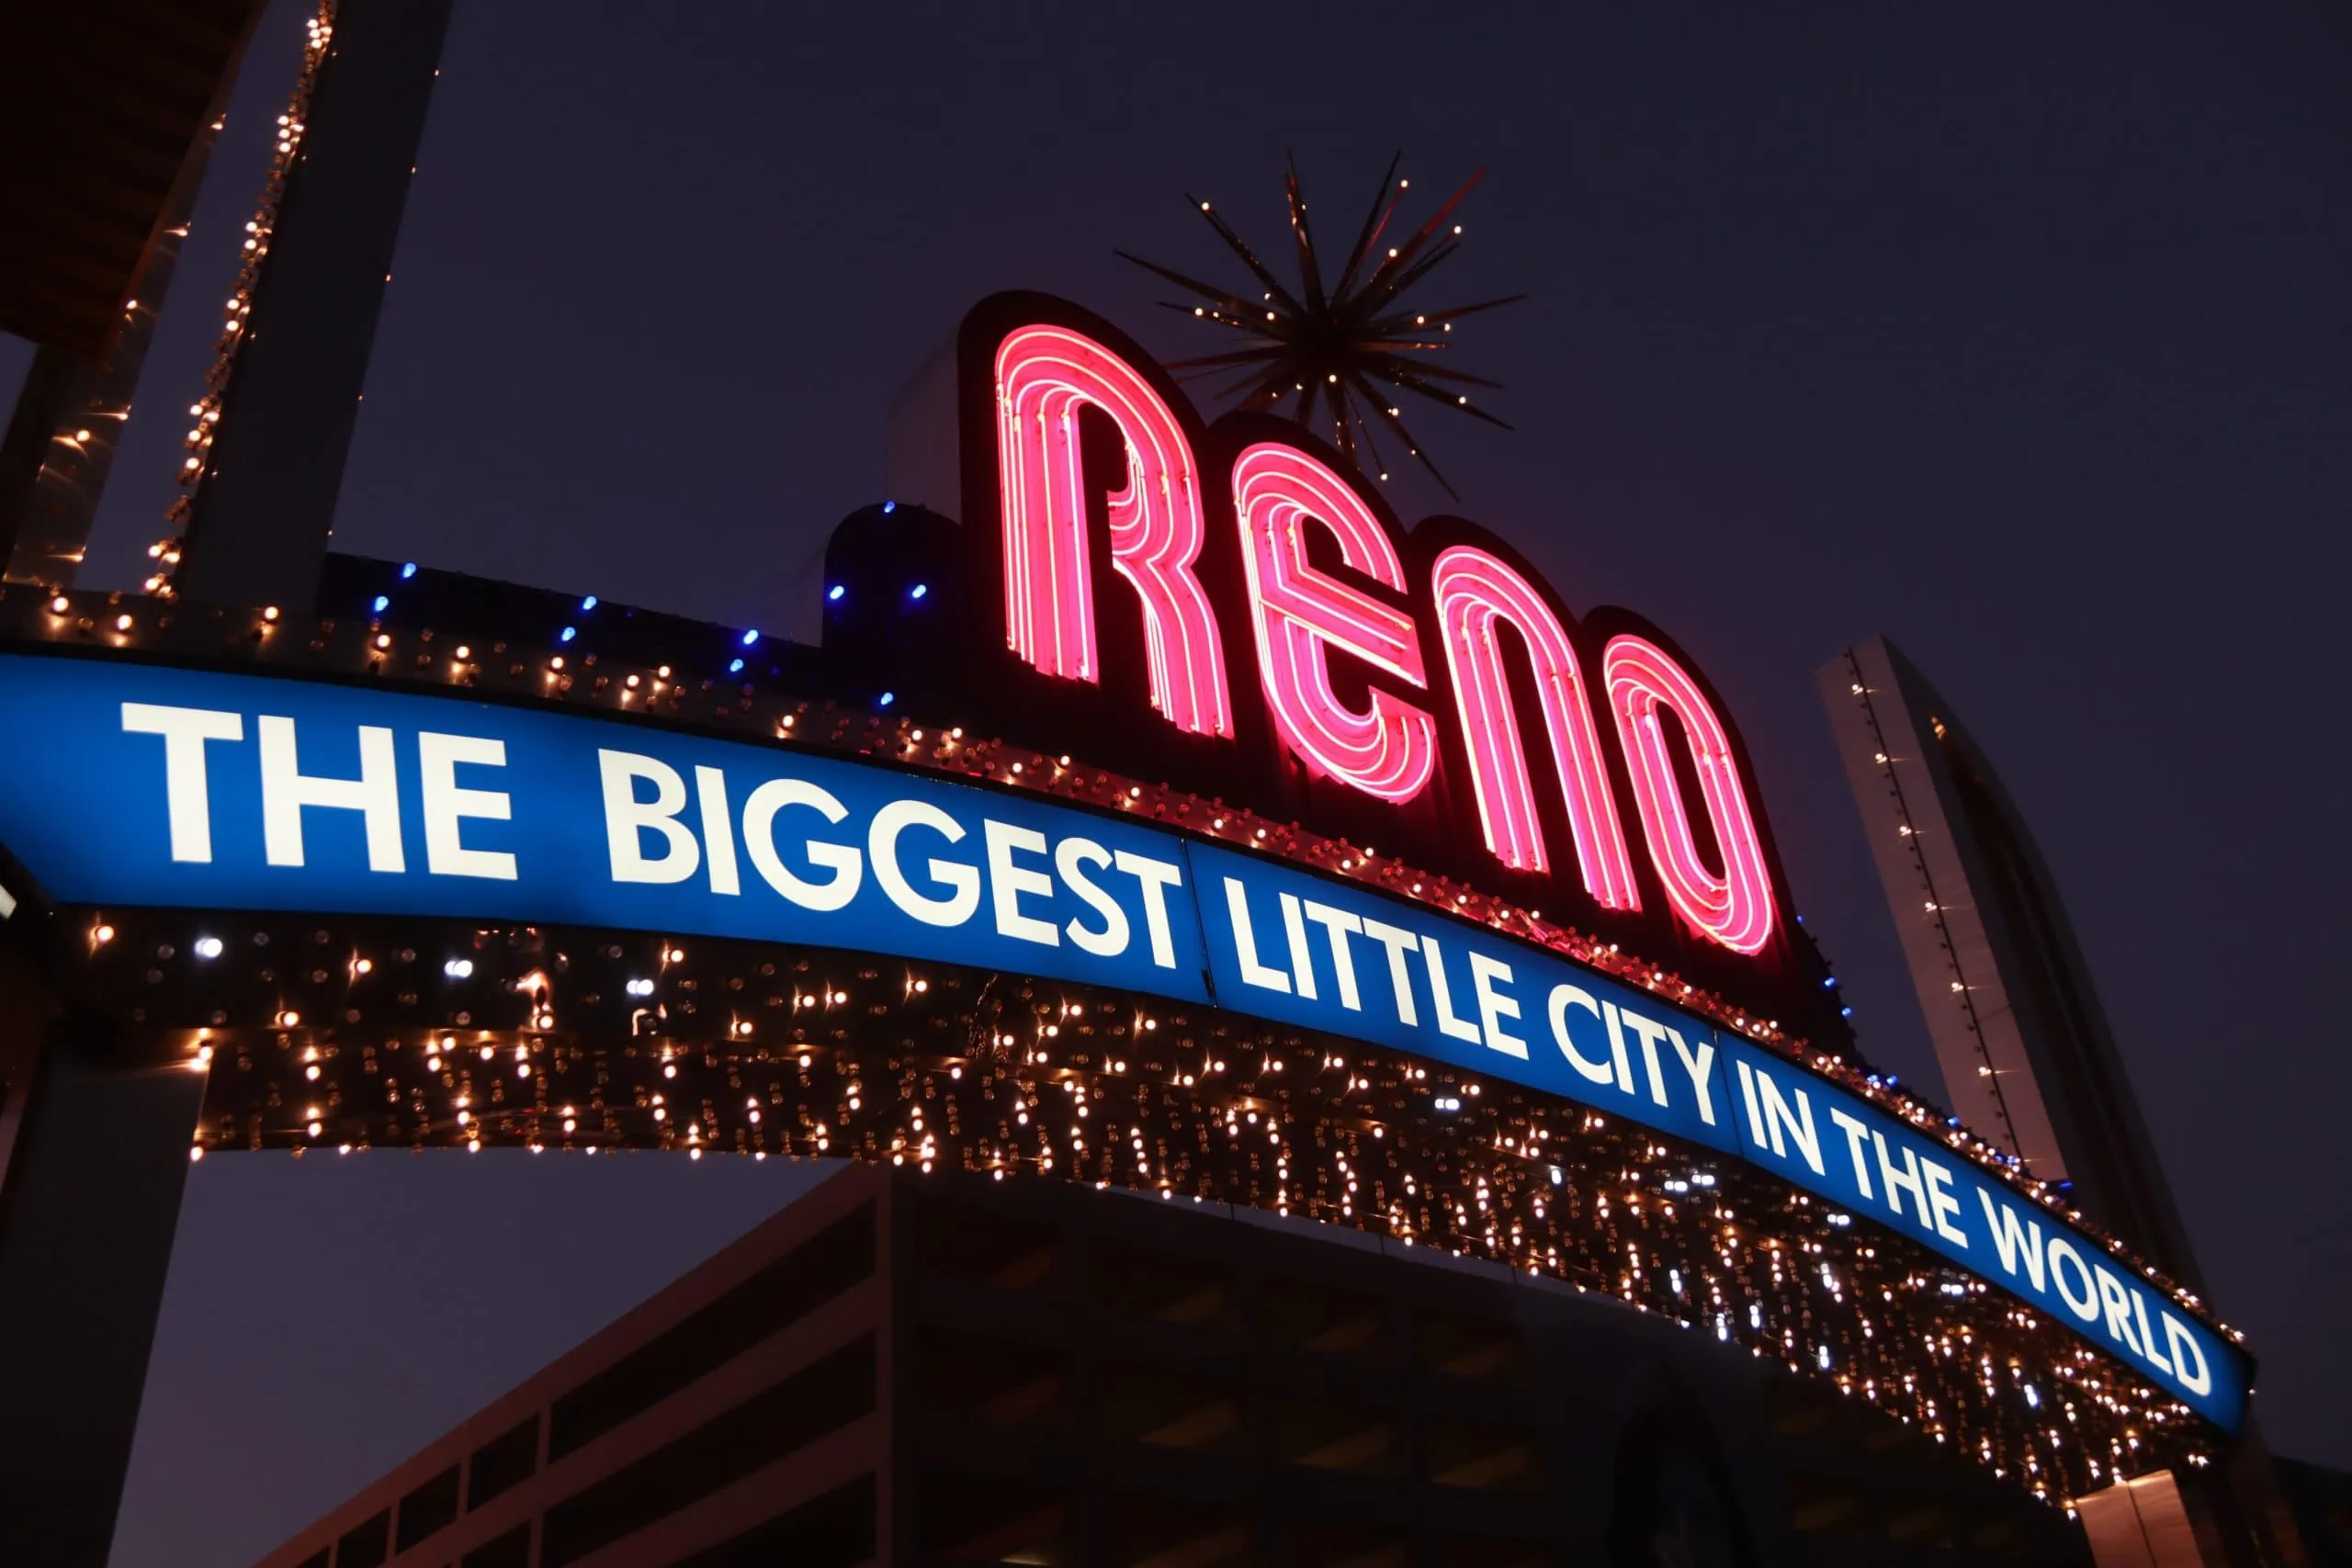 Lit-up sign that reads “The Biggest Little City” to describe the city of Reno, safe with security camera systems